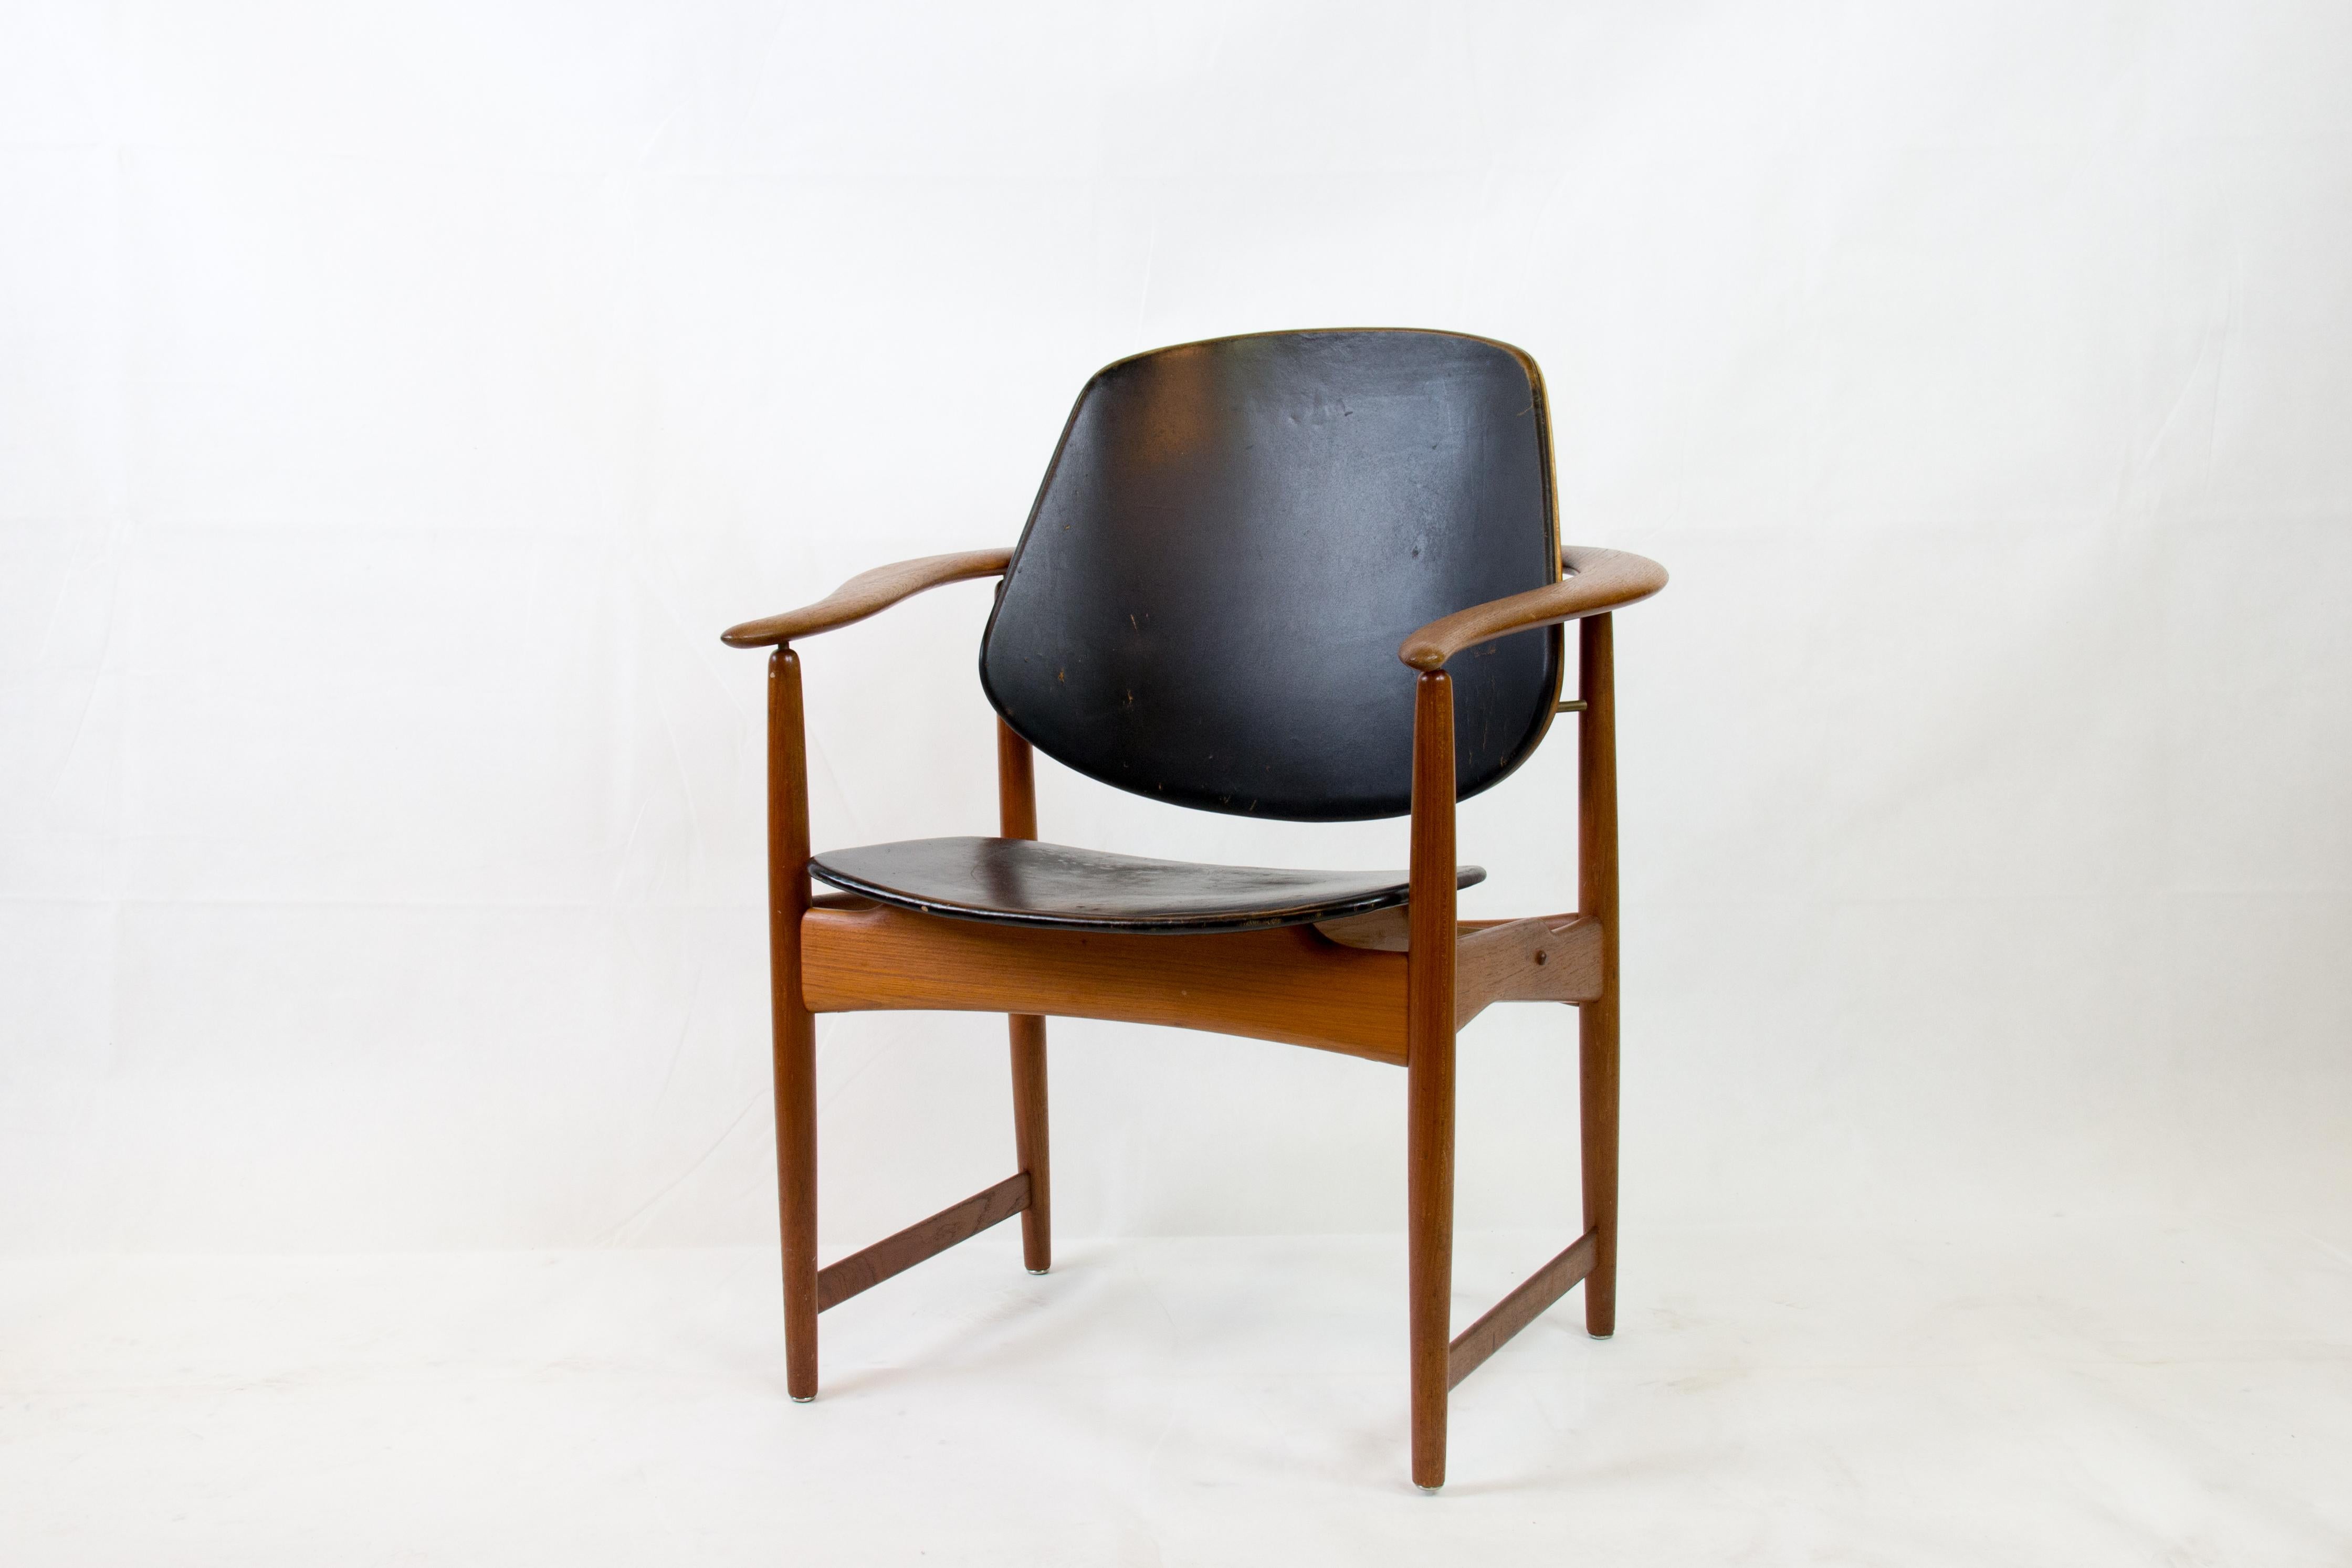 The Armchair Captain's Chair by Arne Hovmand Olsen, crafted in teak and leather in 1958, is a timeless piece of mid-century modern design. This iconic chair features a sleek teak frame with elegant curves and a comfortable leather seat and backrest.